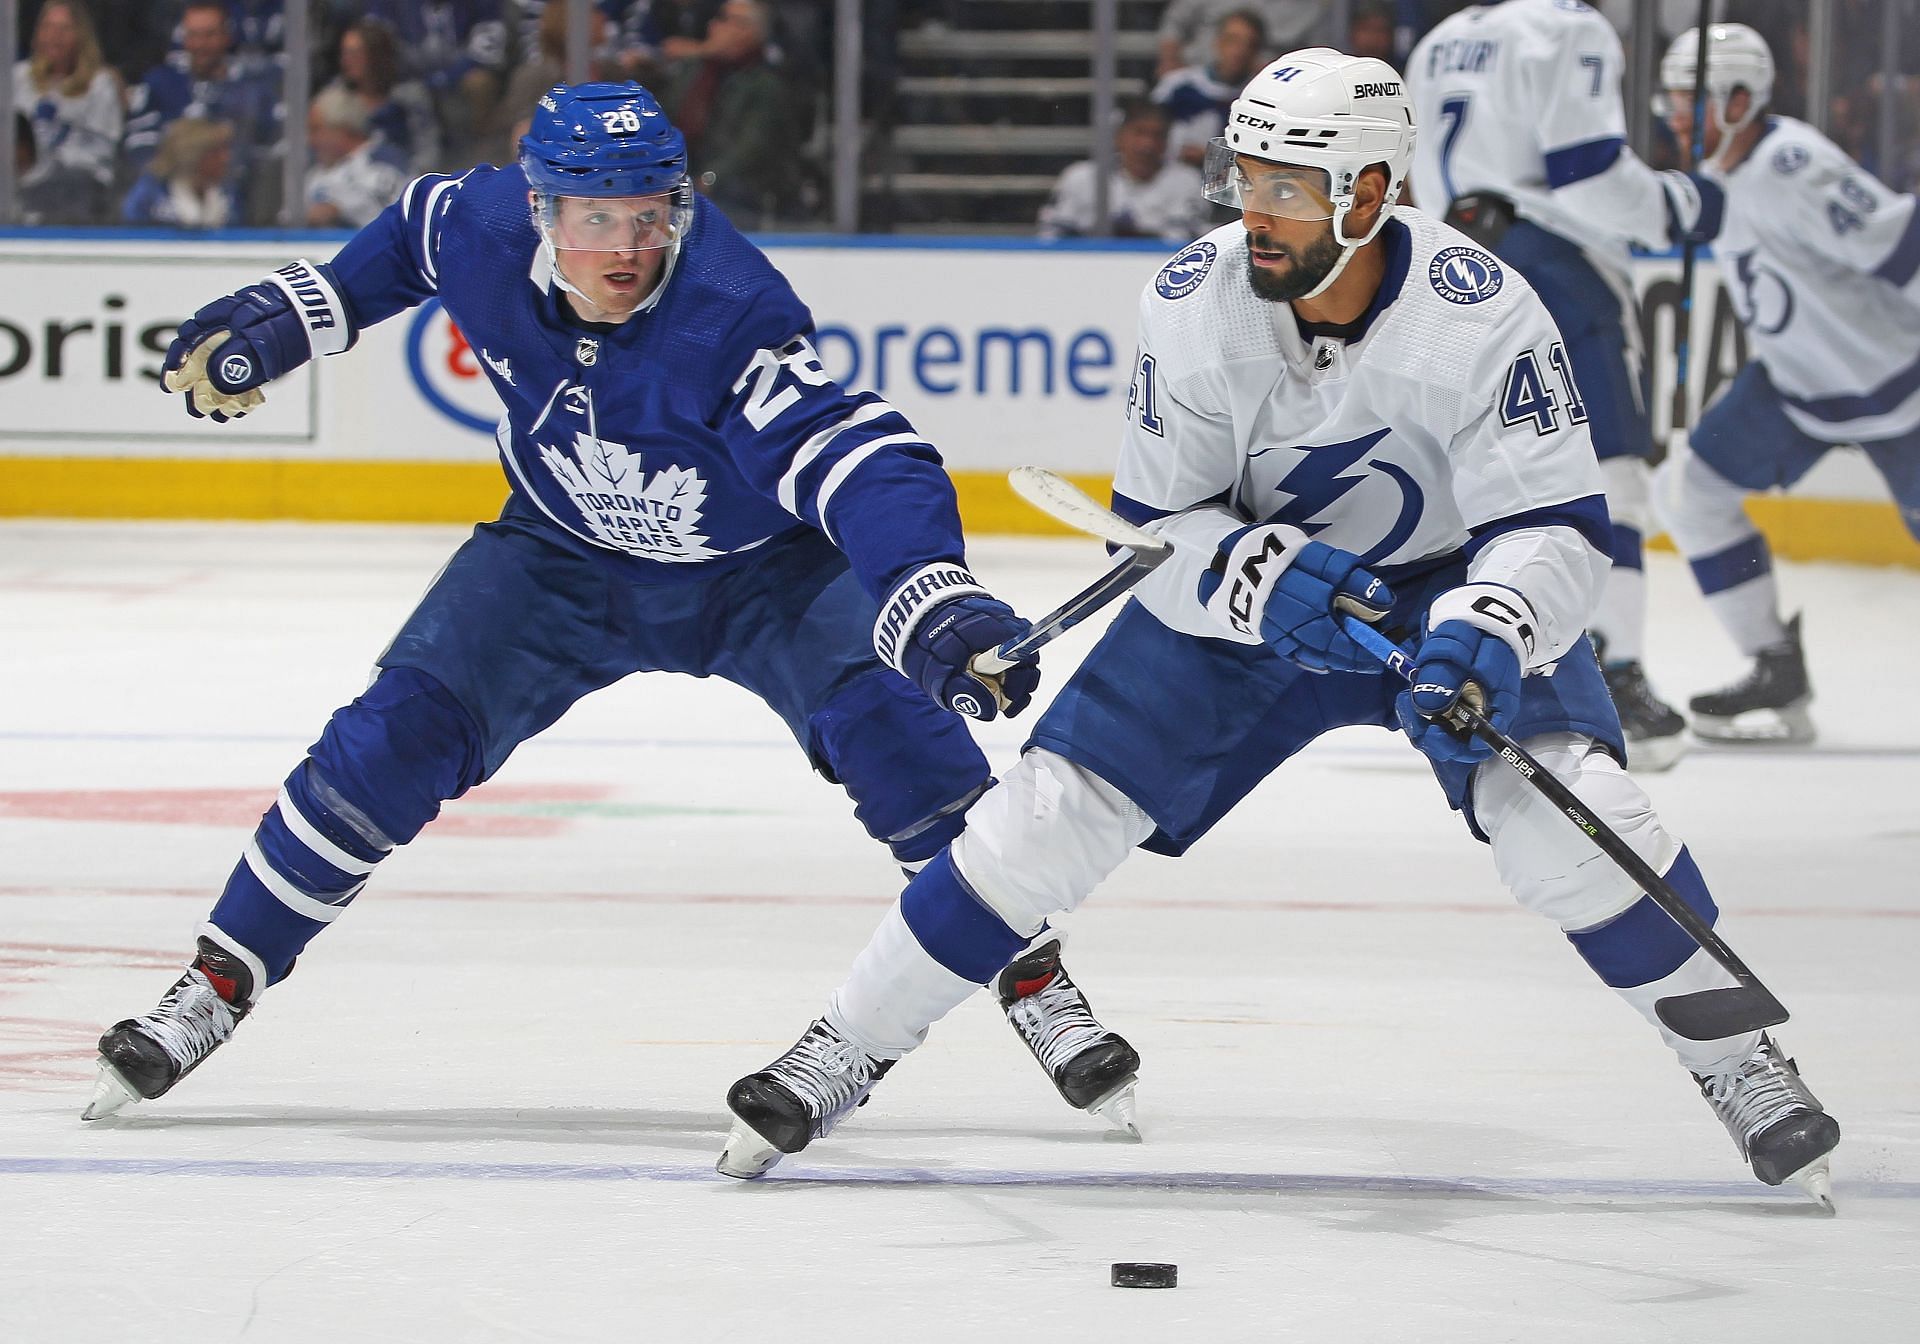 Toronto Maple Leafs forward Sam Lafferty fined for cross-checking Ross  Colton - Daily Faceoff